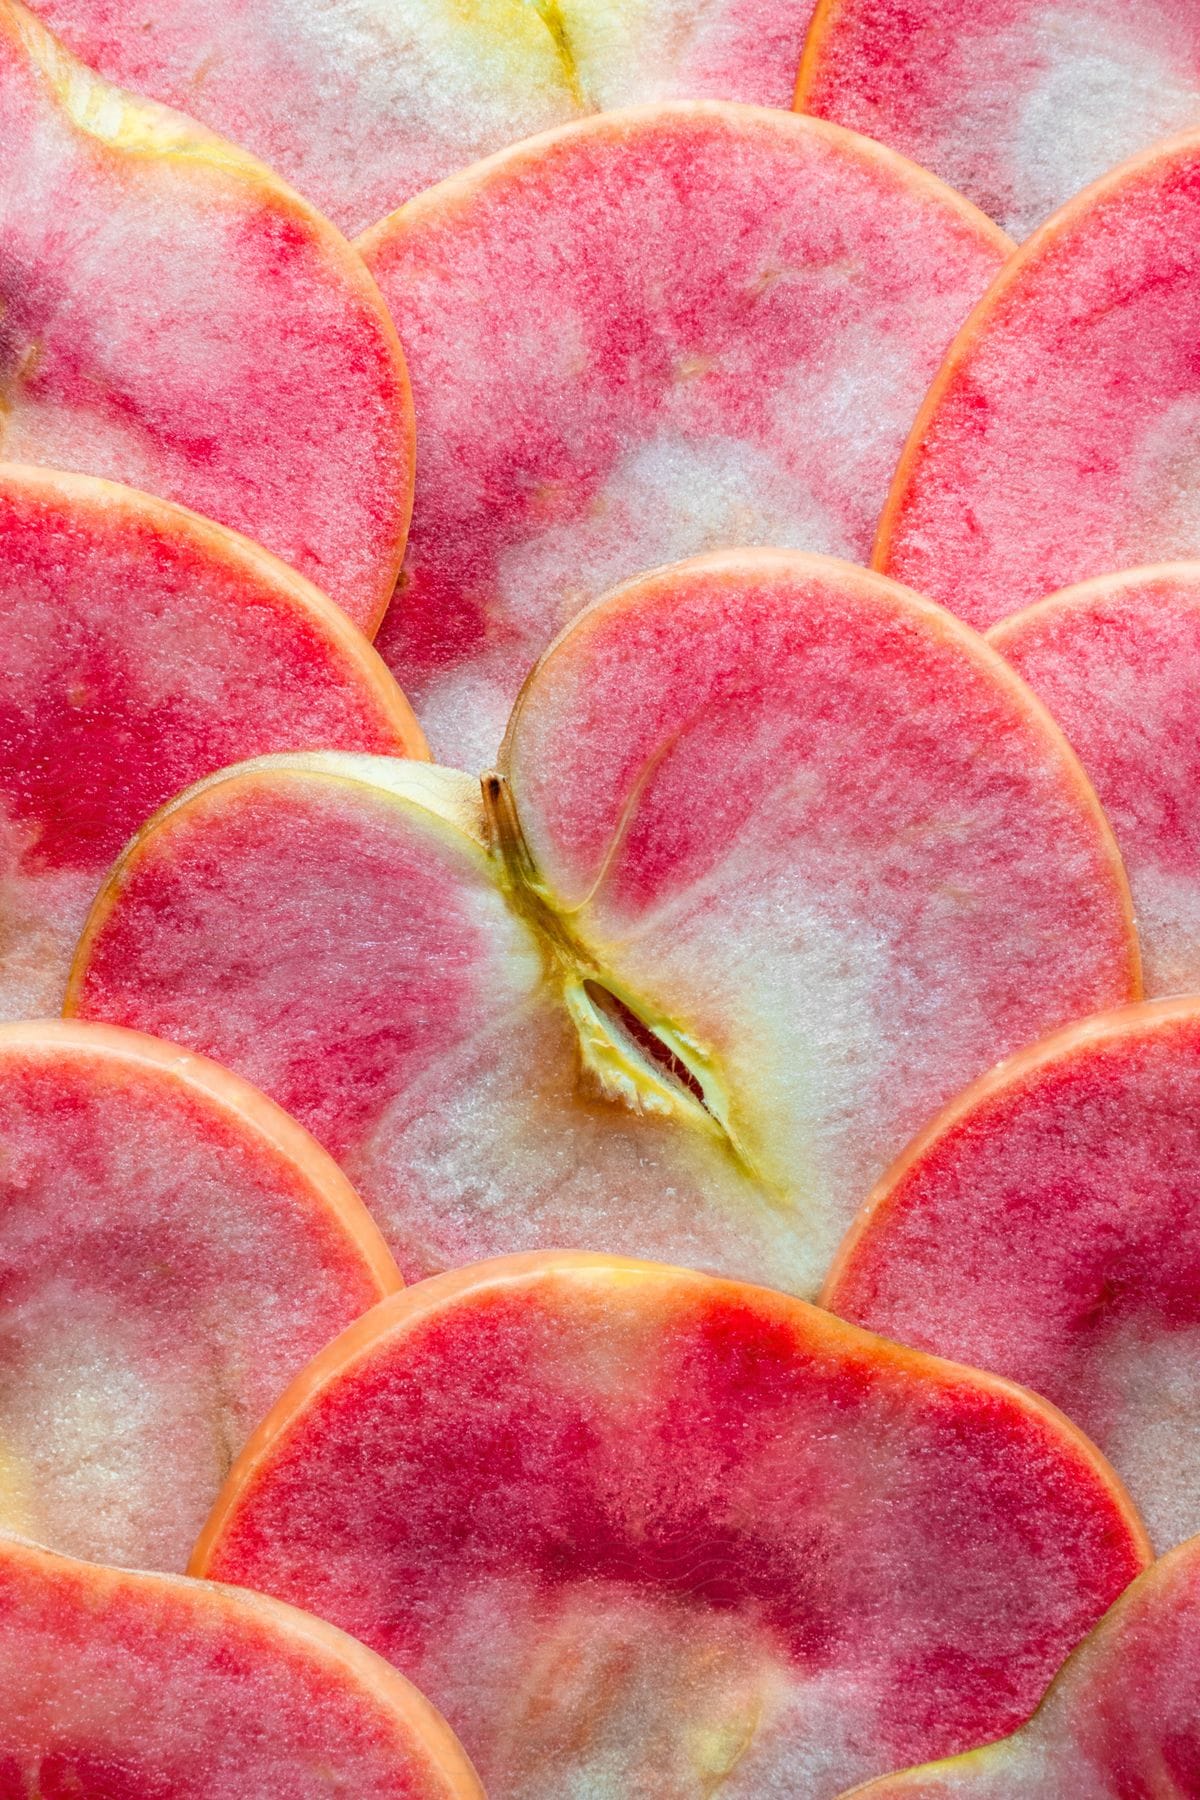 Close-up of thinly sliced red apples arranged in a pattern, showcasing a gradient of red and white colors.